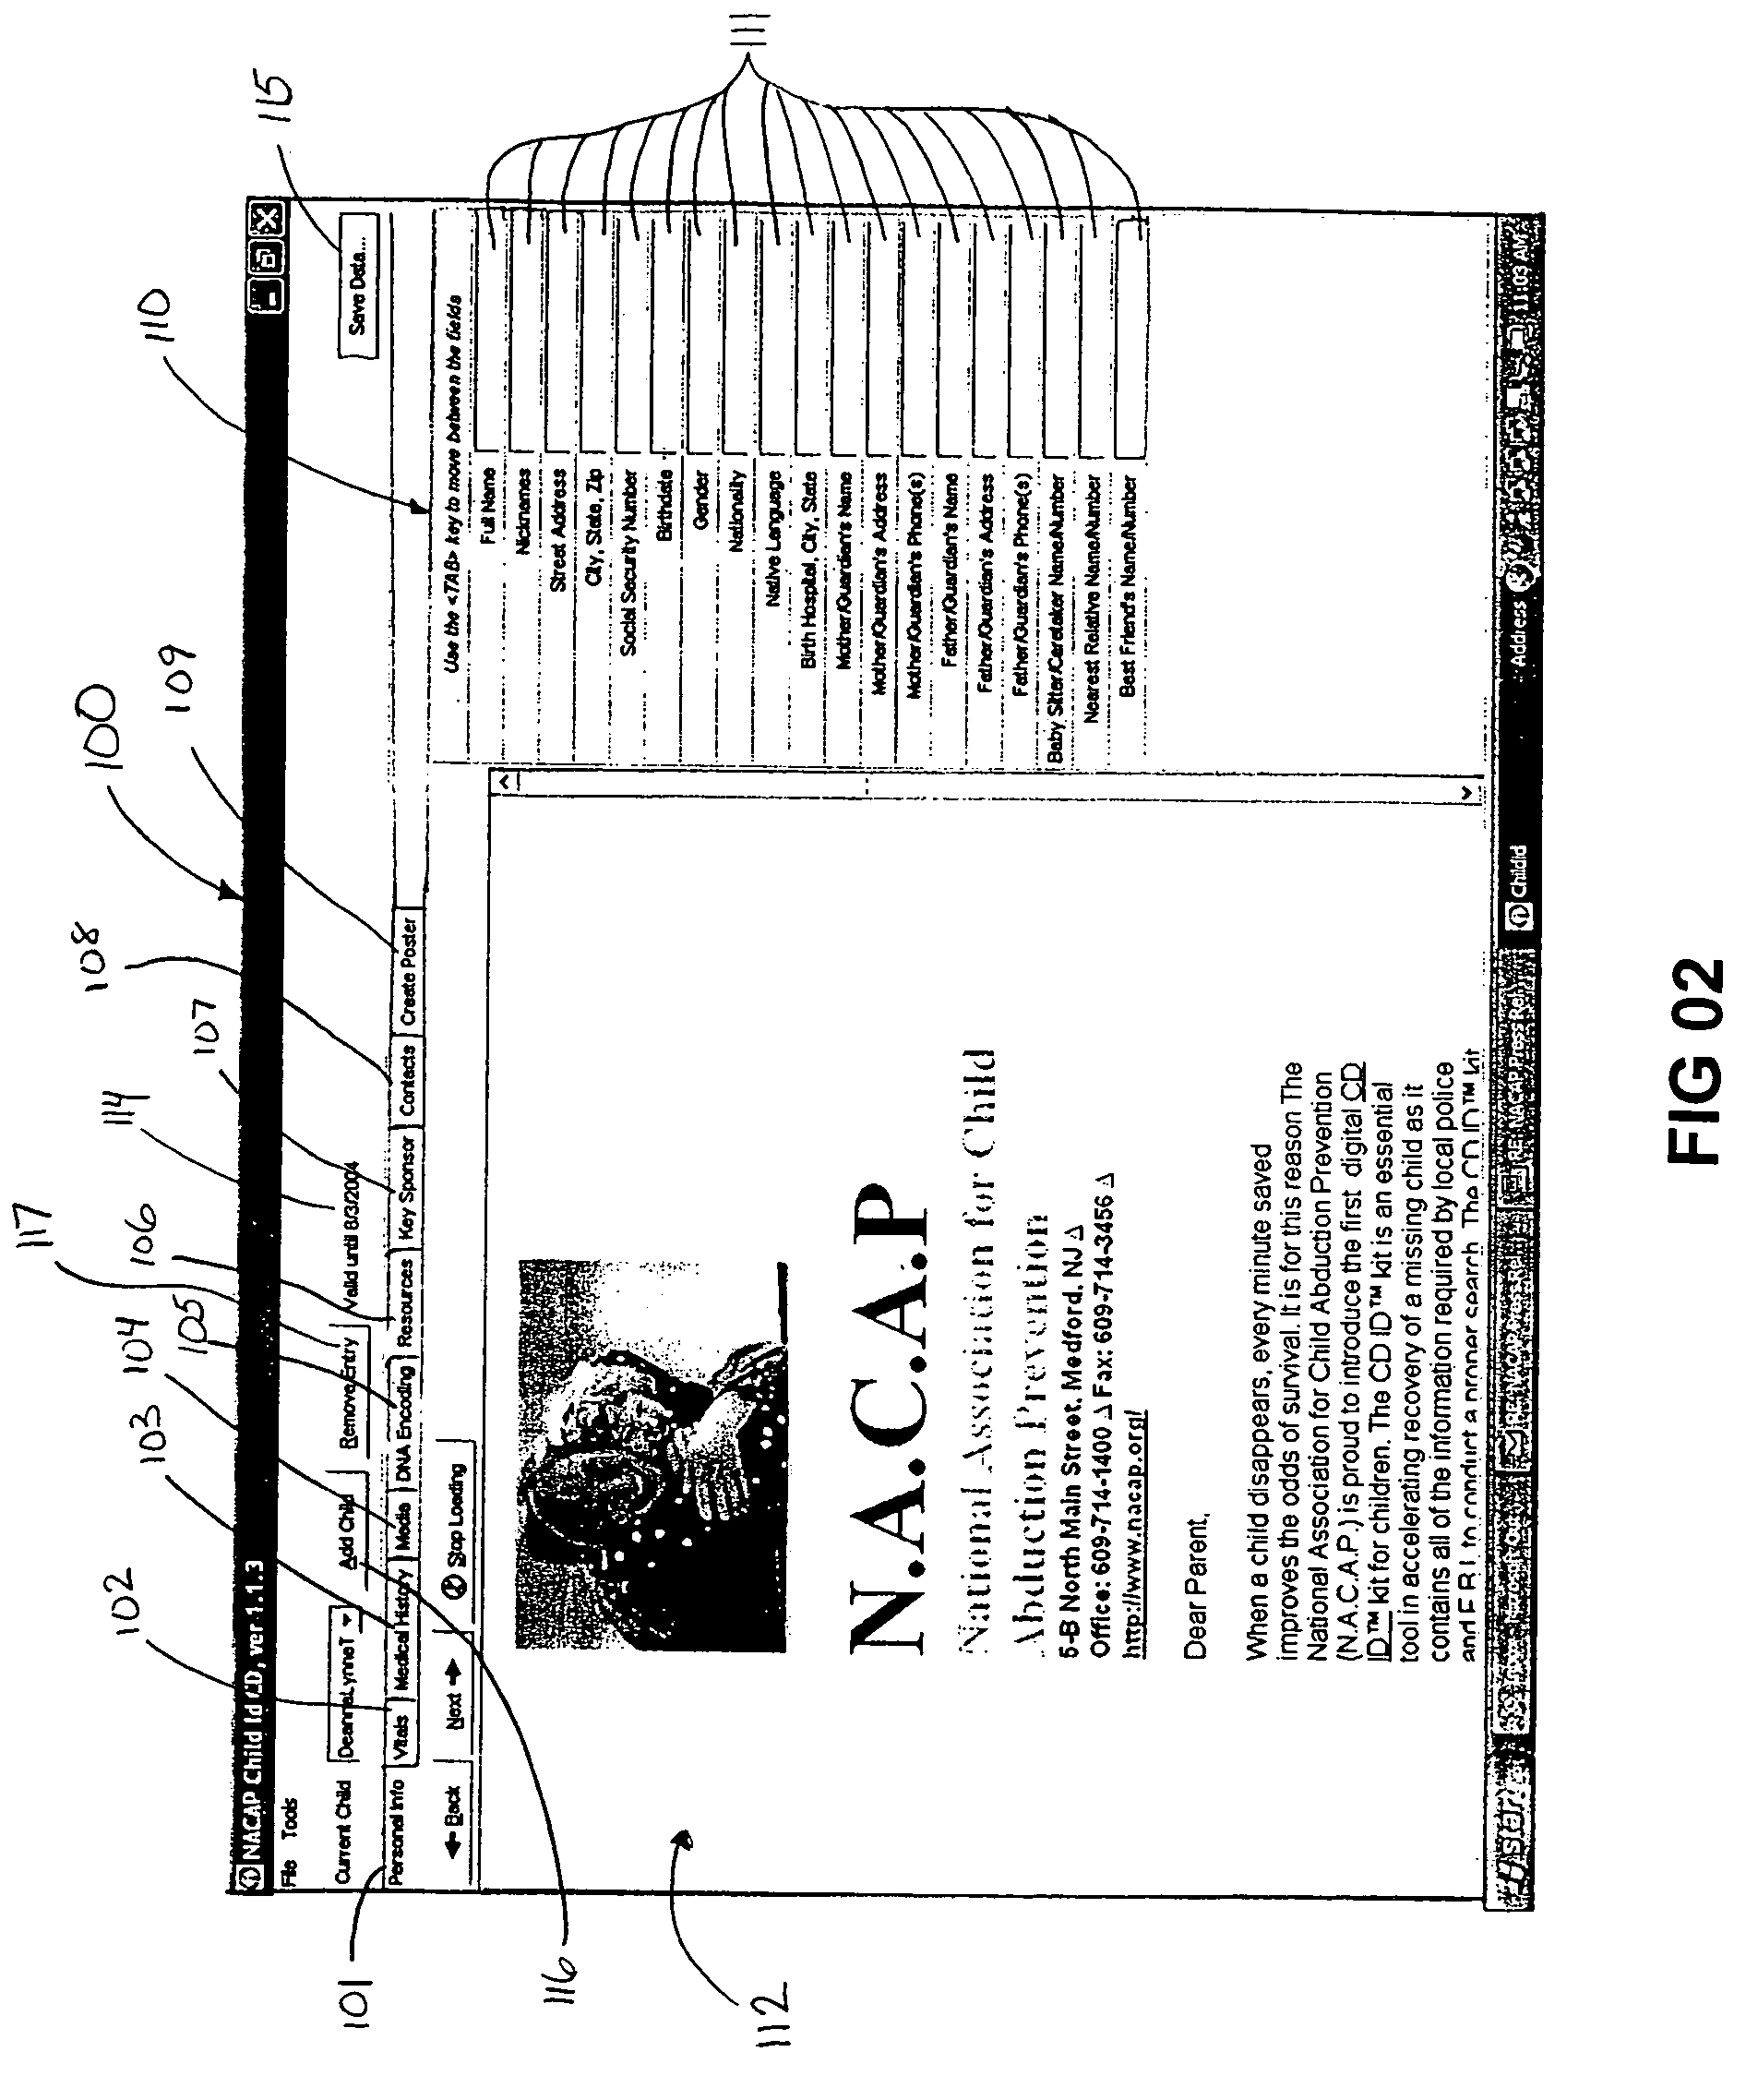 System, method of portable USB key interfaced to computer system for facilitating the recovery and/or identification of a missing person having person's unique identification, biological information